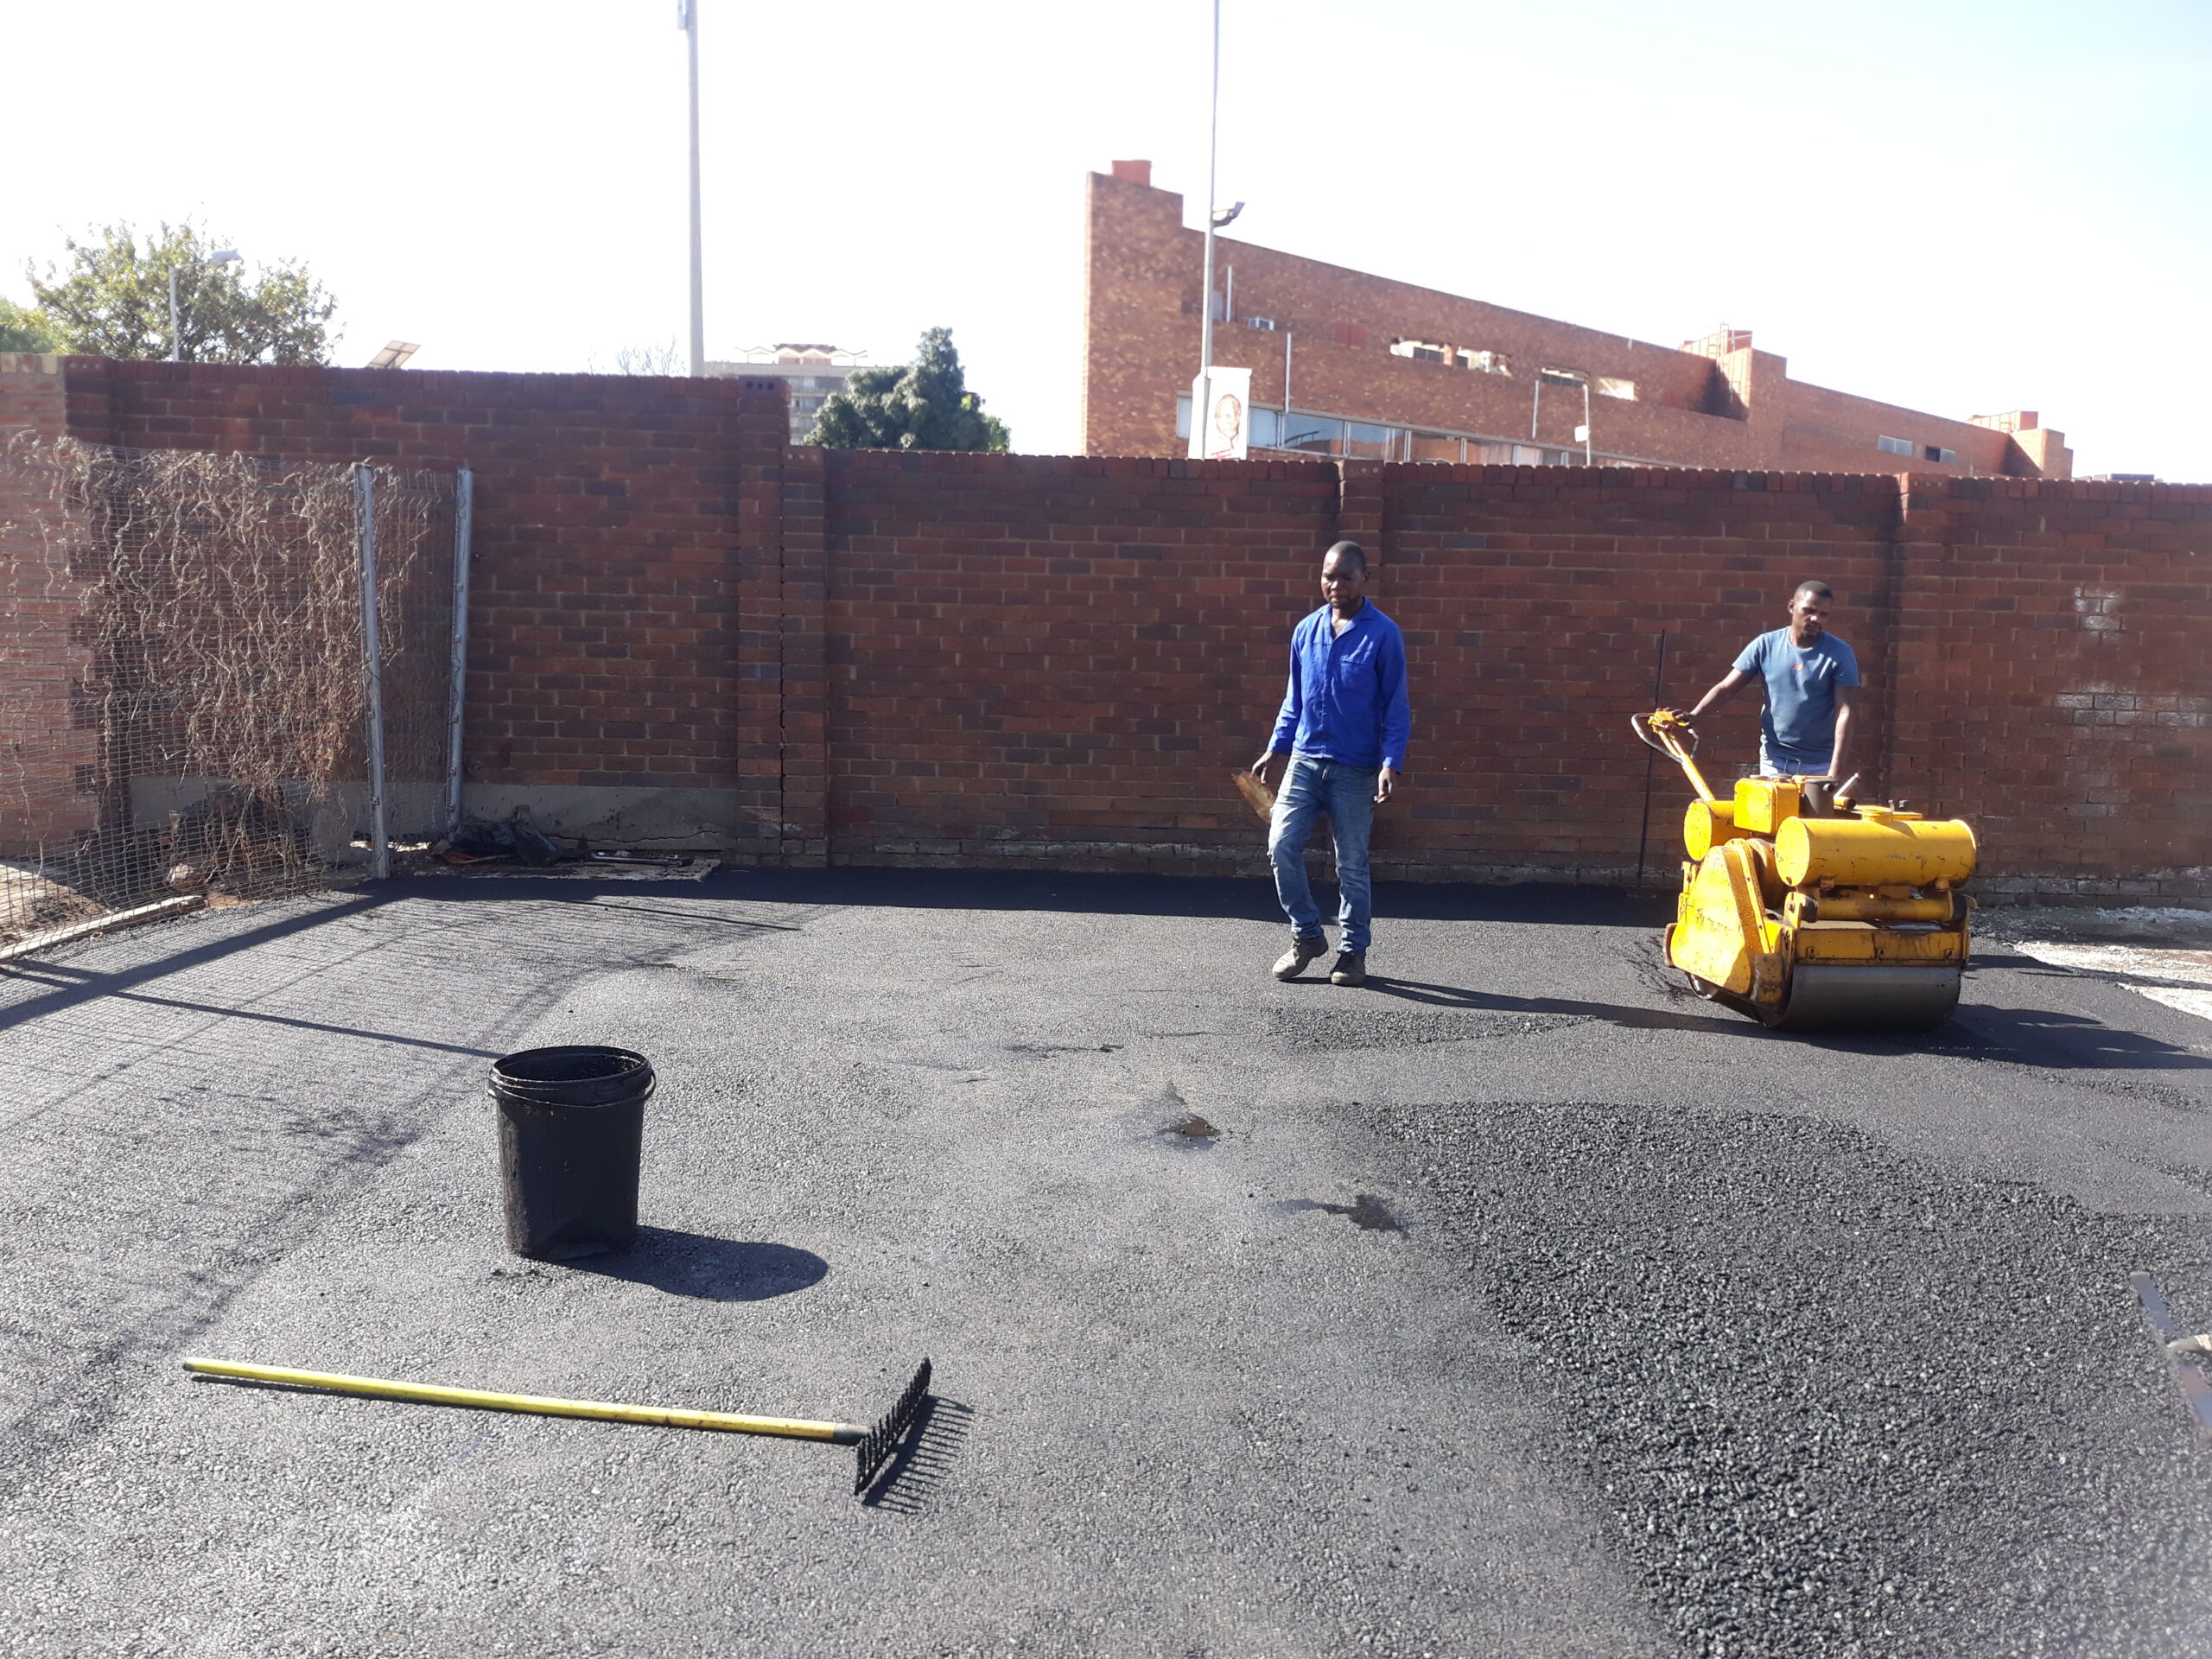 Tarmac,Tennis Courts & Brick Paving Projects